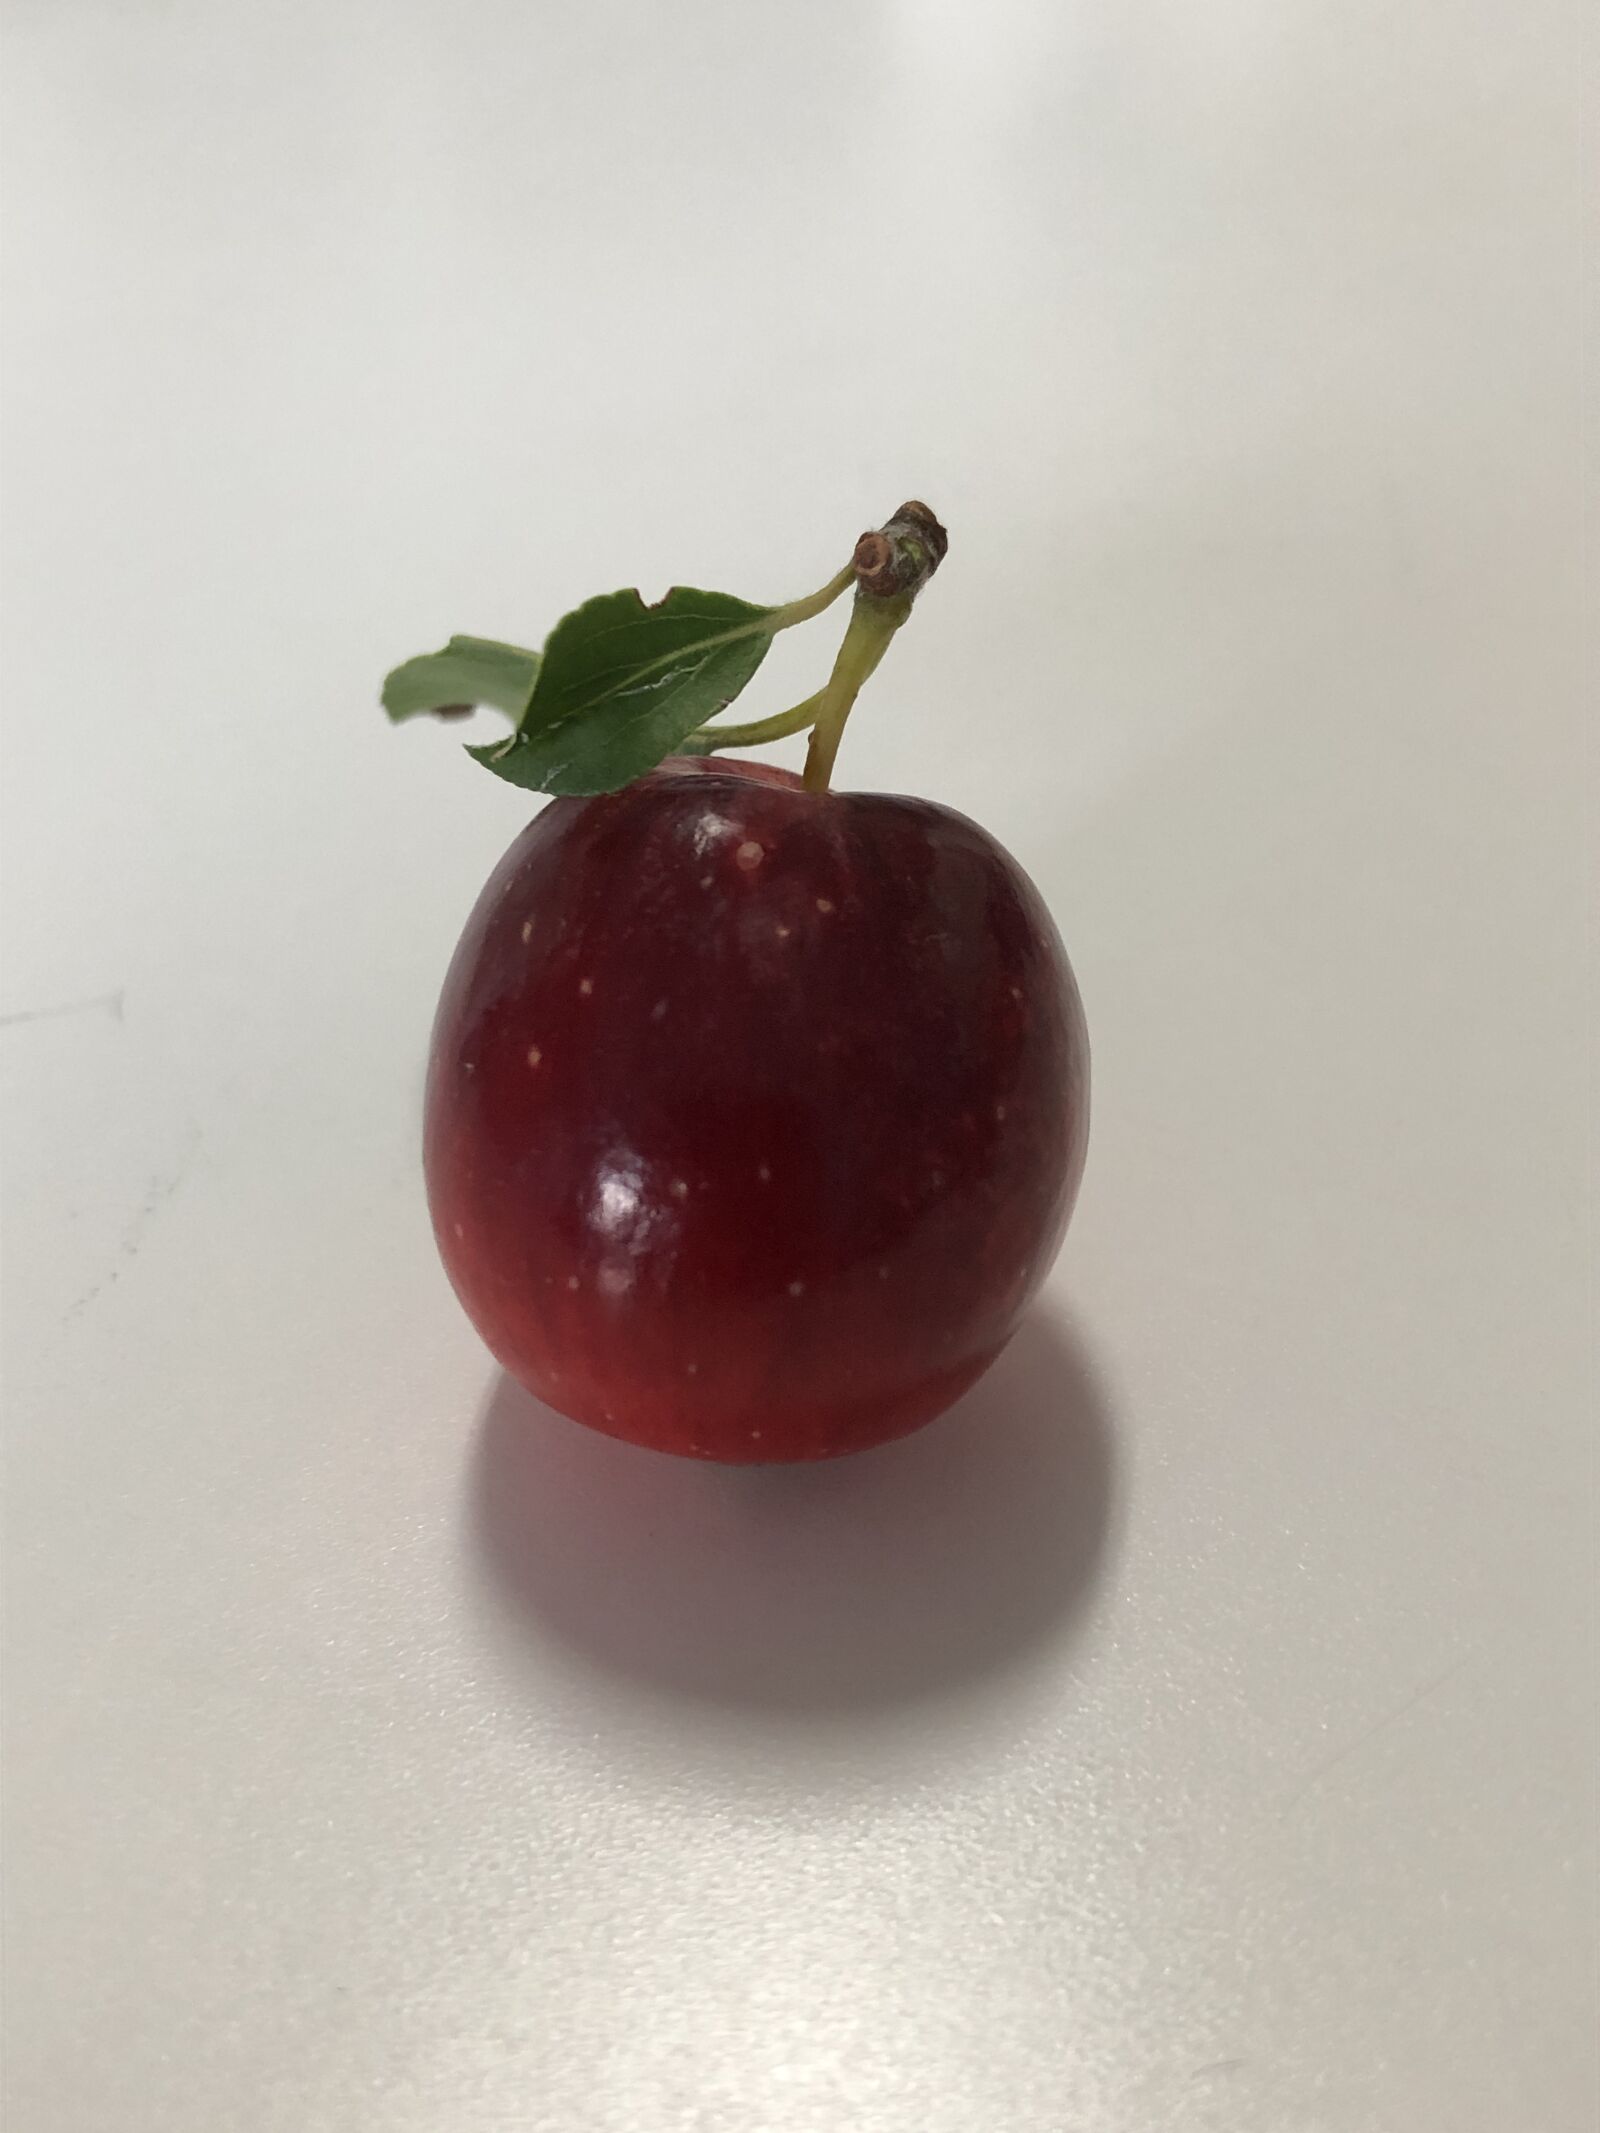 Apple iPhone 8 sample photo. Crab apple, apple, nature photography